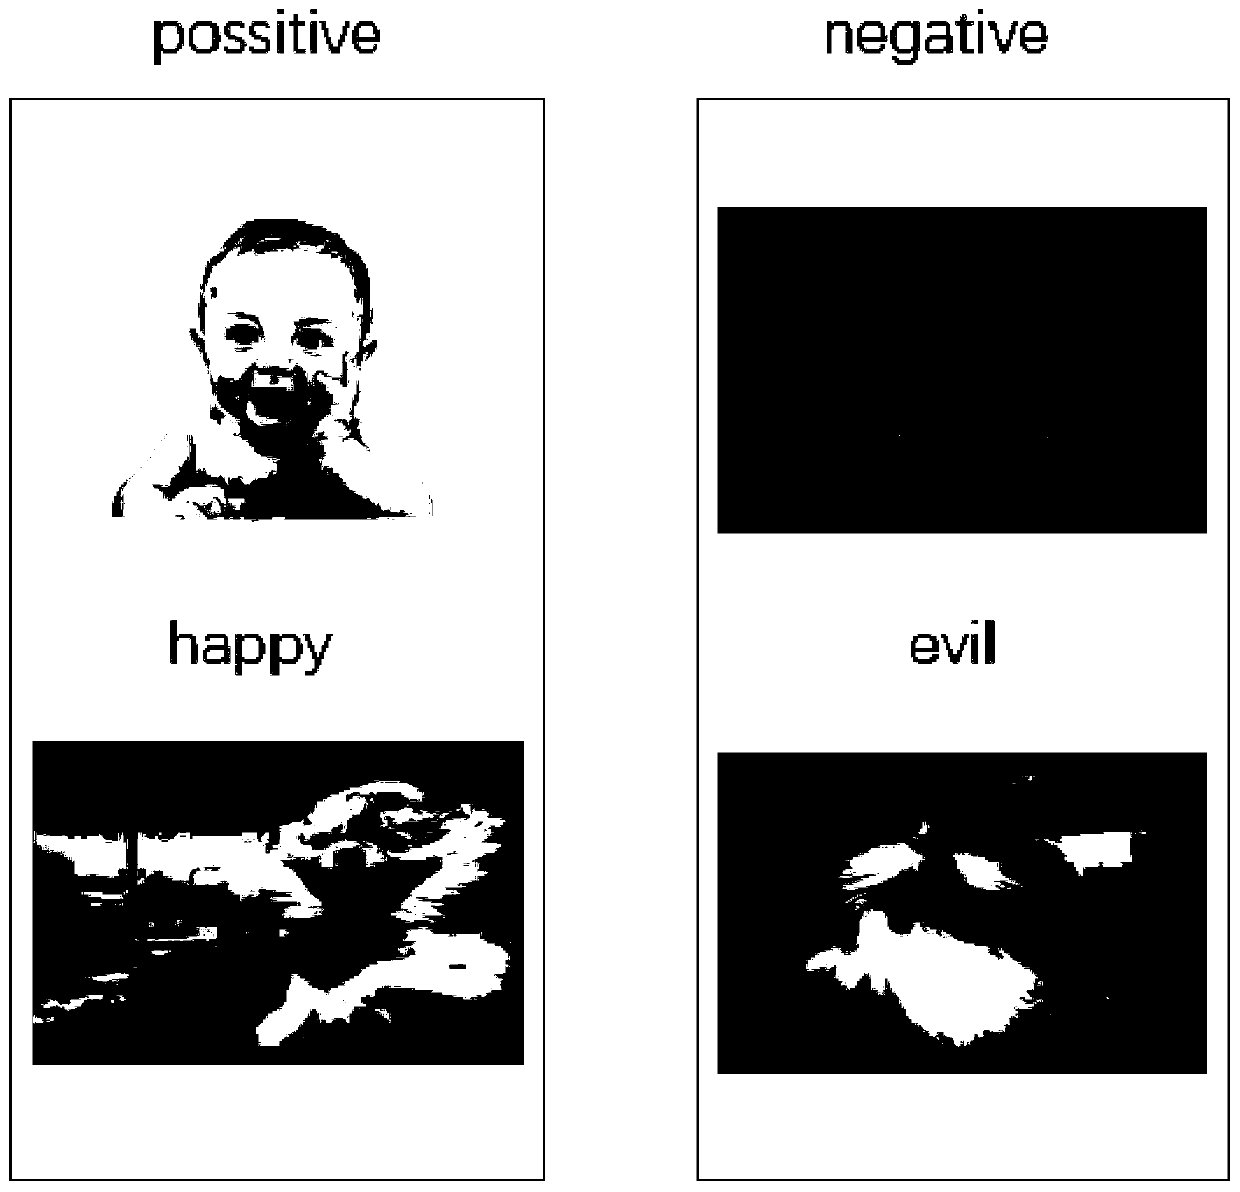 Image emotion classification method based on LSTM network and attention mechanism